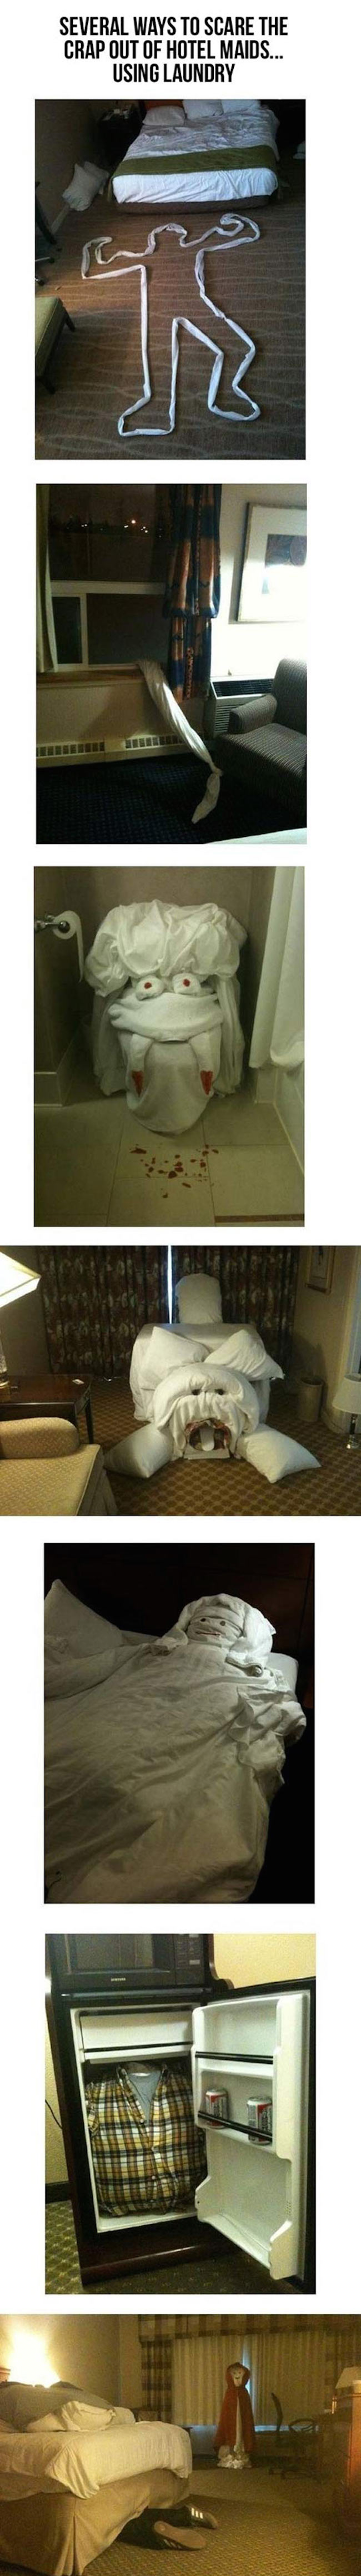 Here Are A Number Of Ways To Scare The Hell Out Of Your Hotel Maids